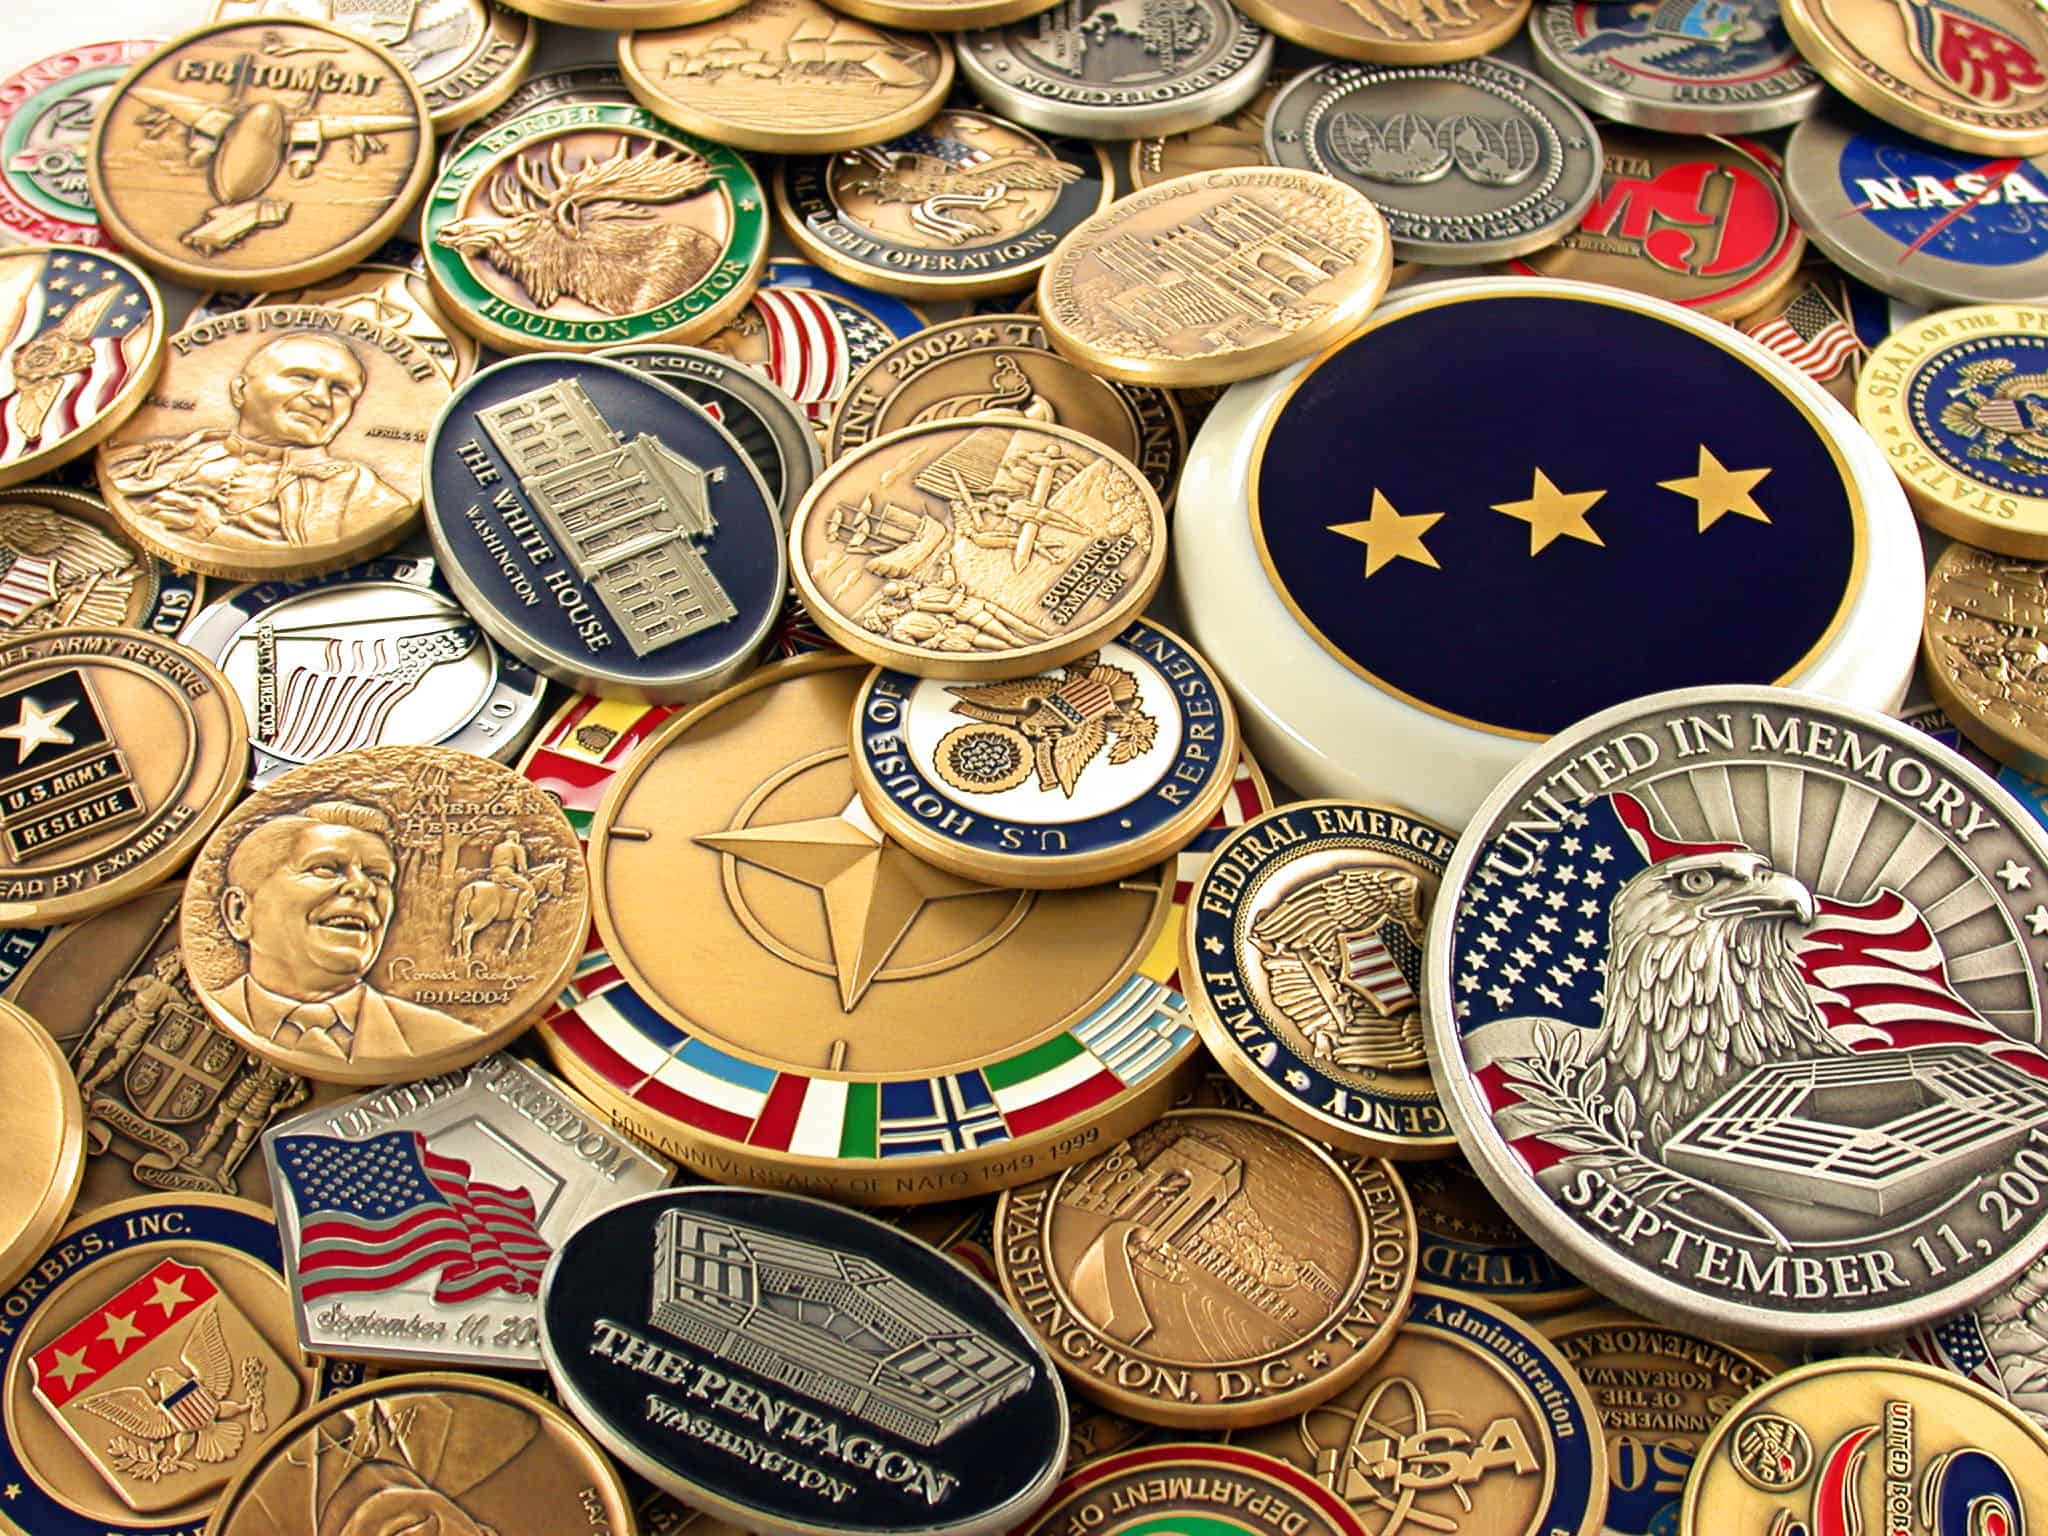 c forbes challenge coins